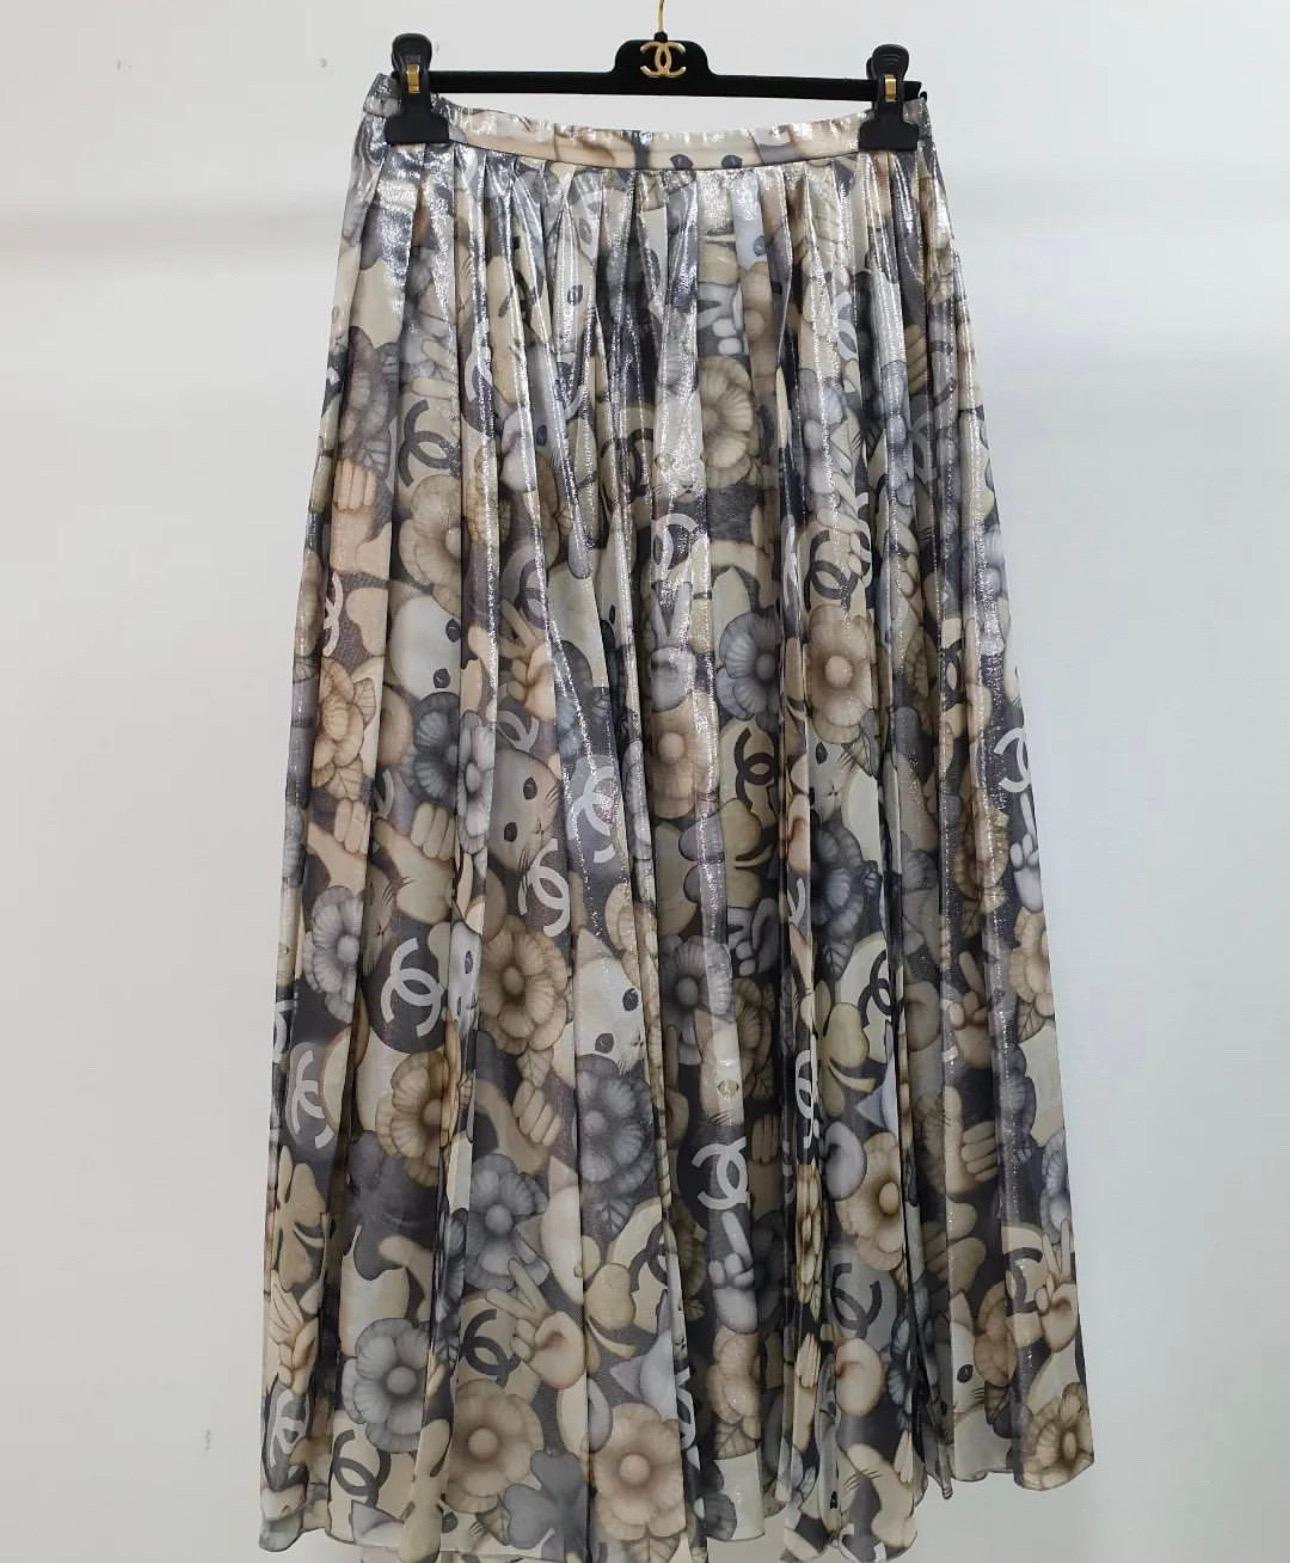 chanel-fall-2016-front-row-only-collection-cat-skirt
Sz.40
Very good condition.
Hanger is not included.